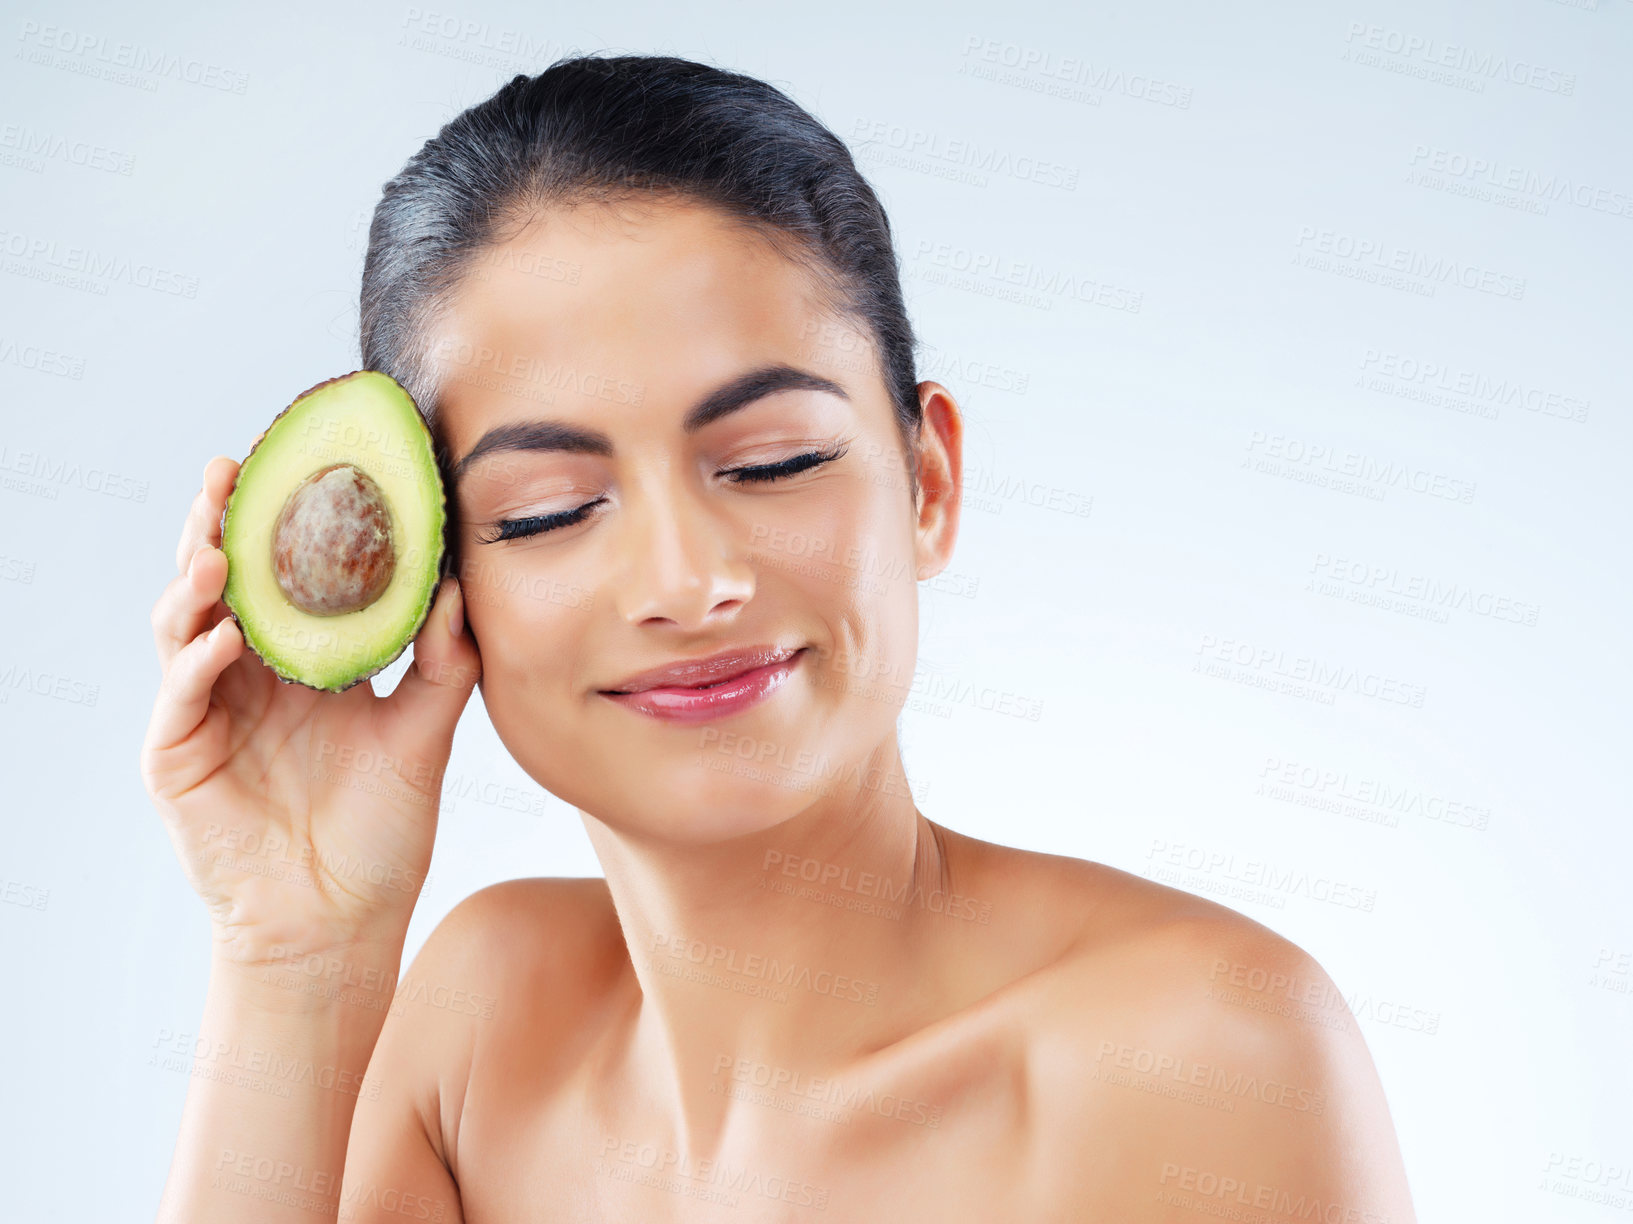 Buy stock photo Studio portrait of an attractive young woman holding an avocado against a gray background